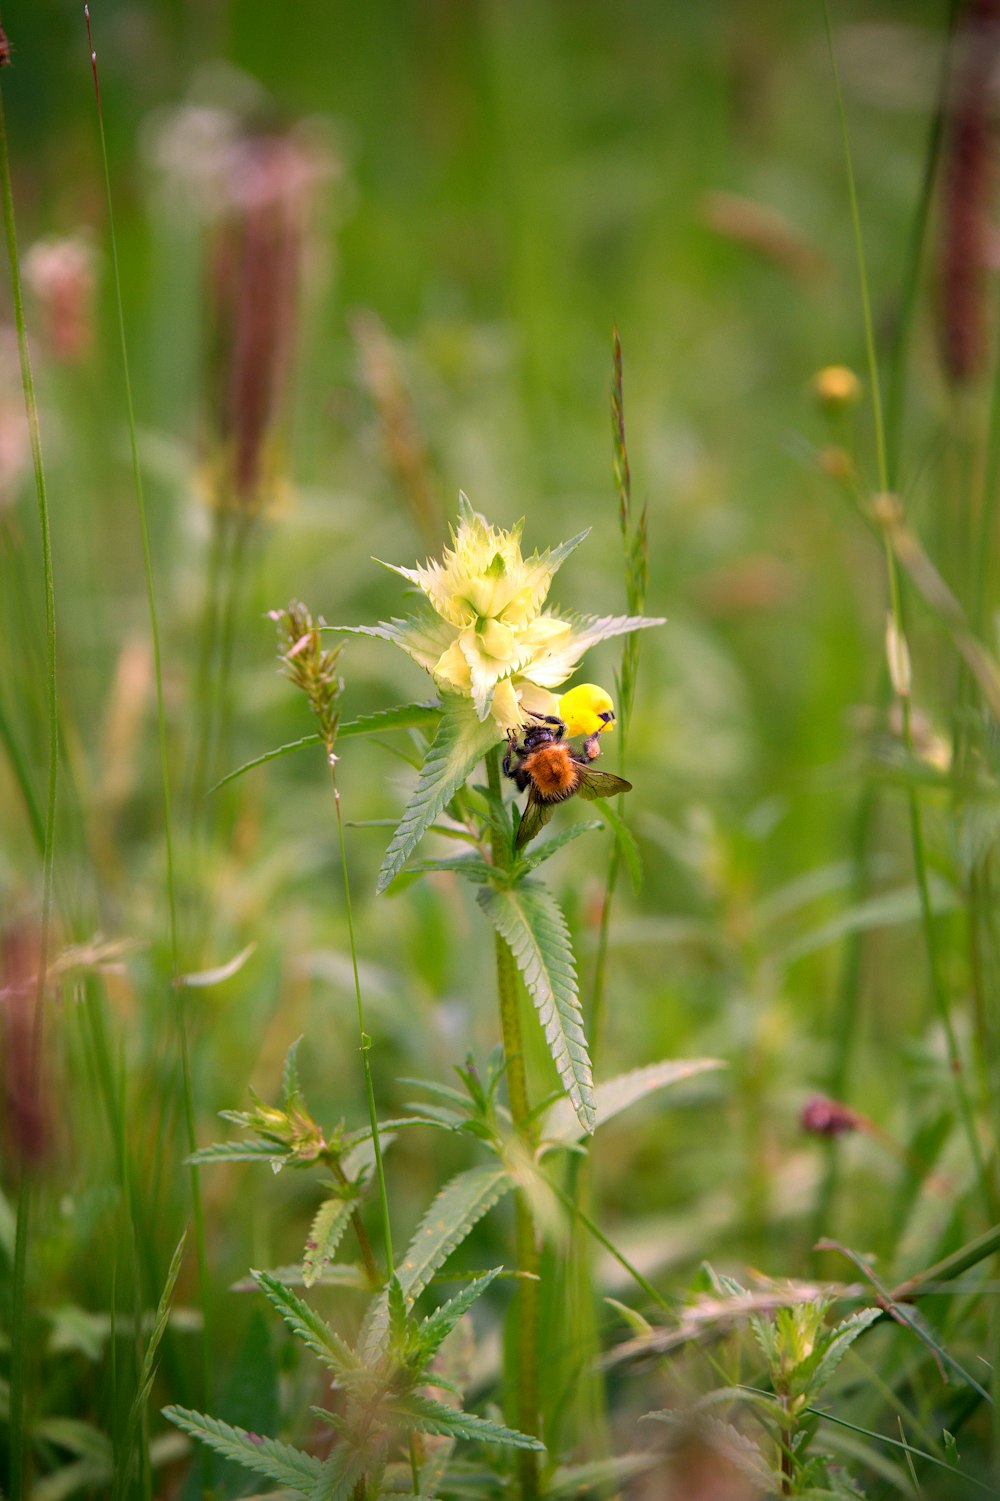 a bug on a flower in a field of grass